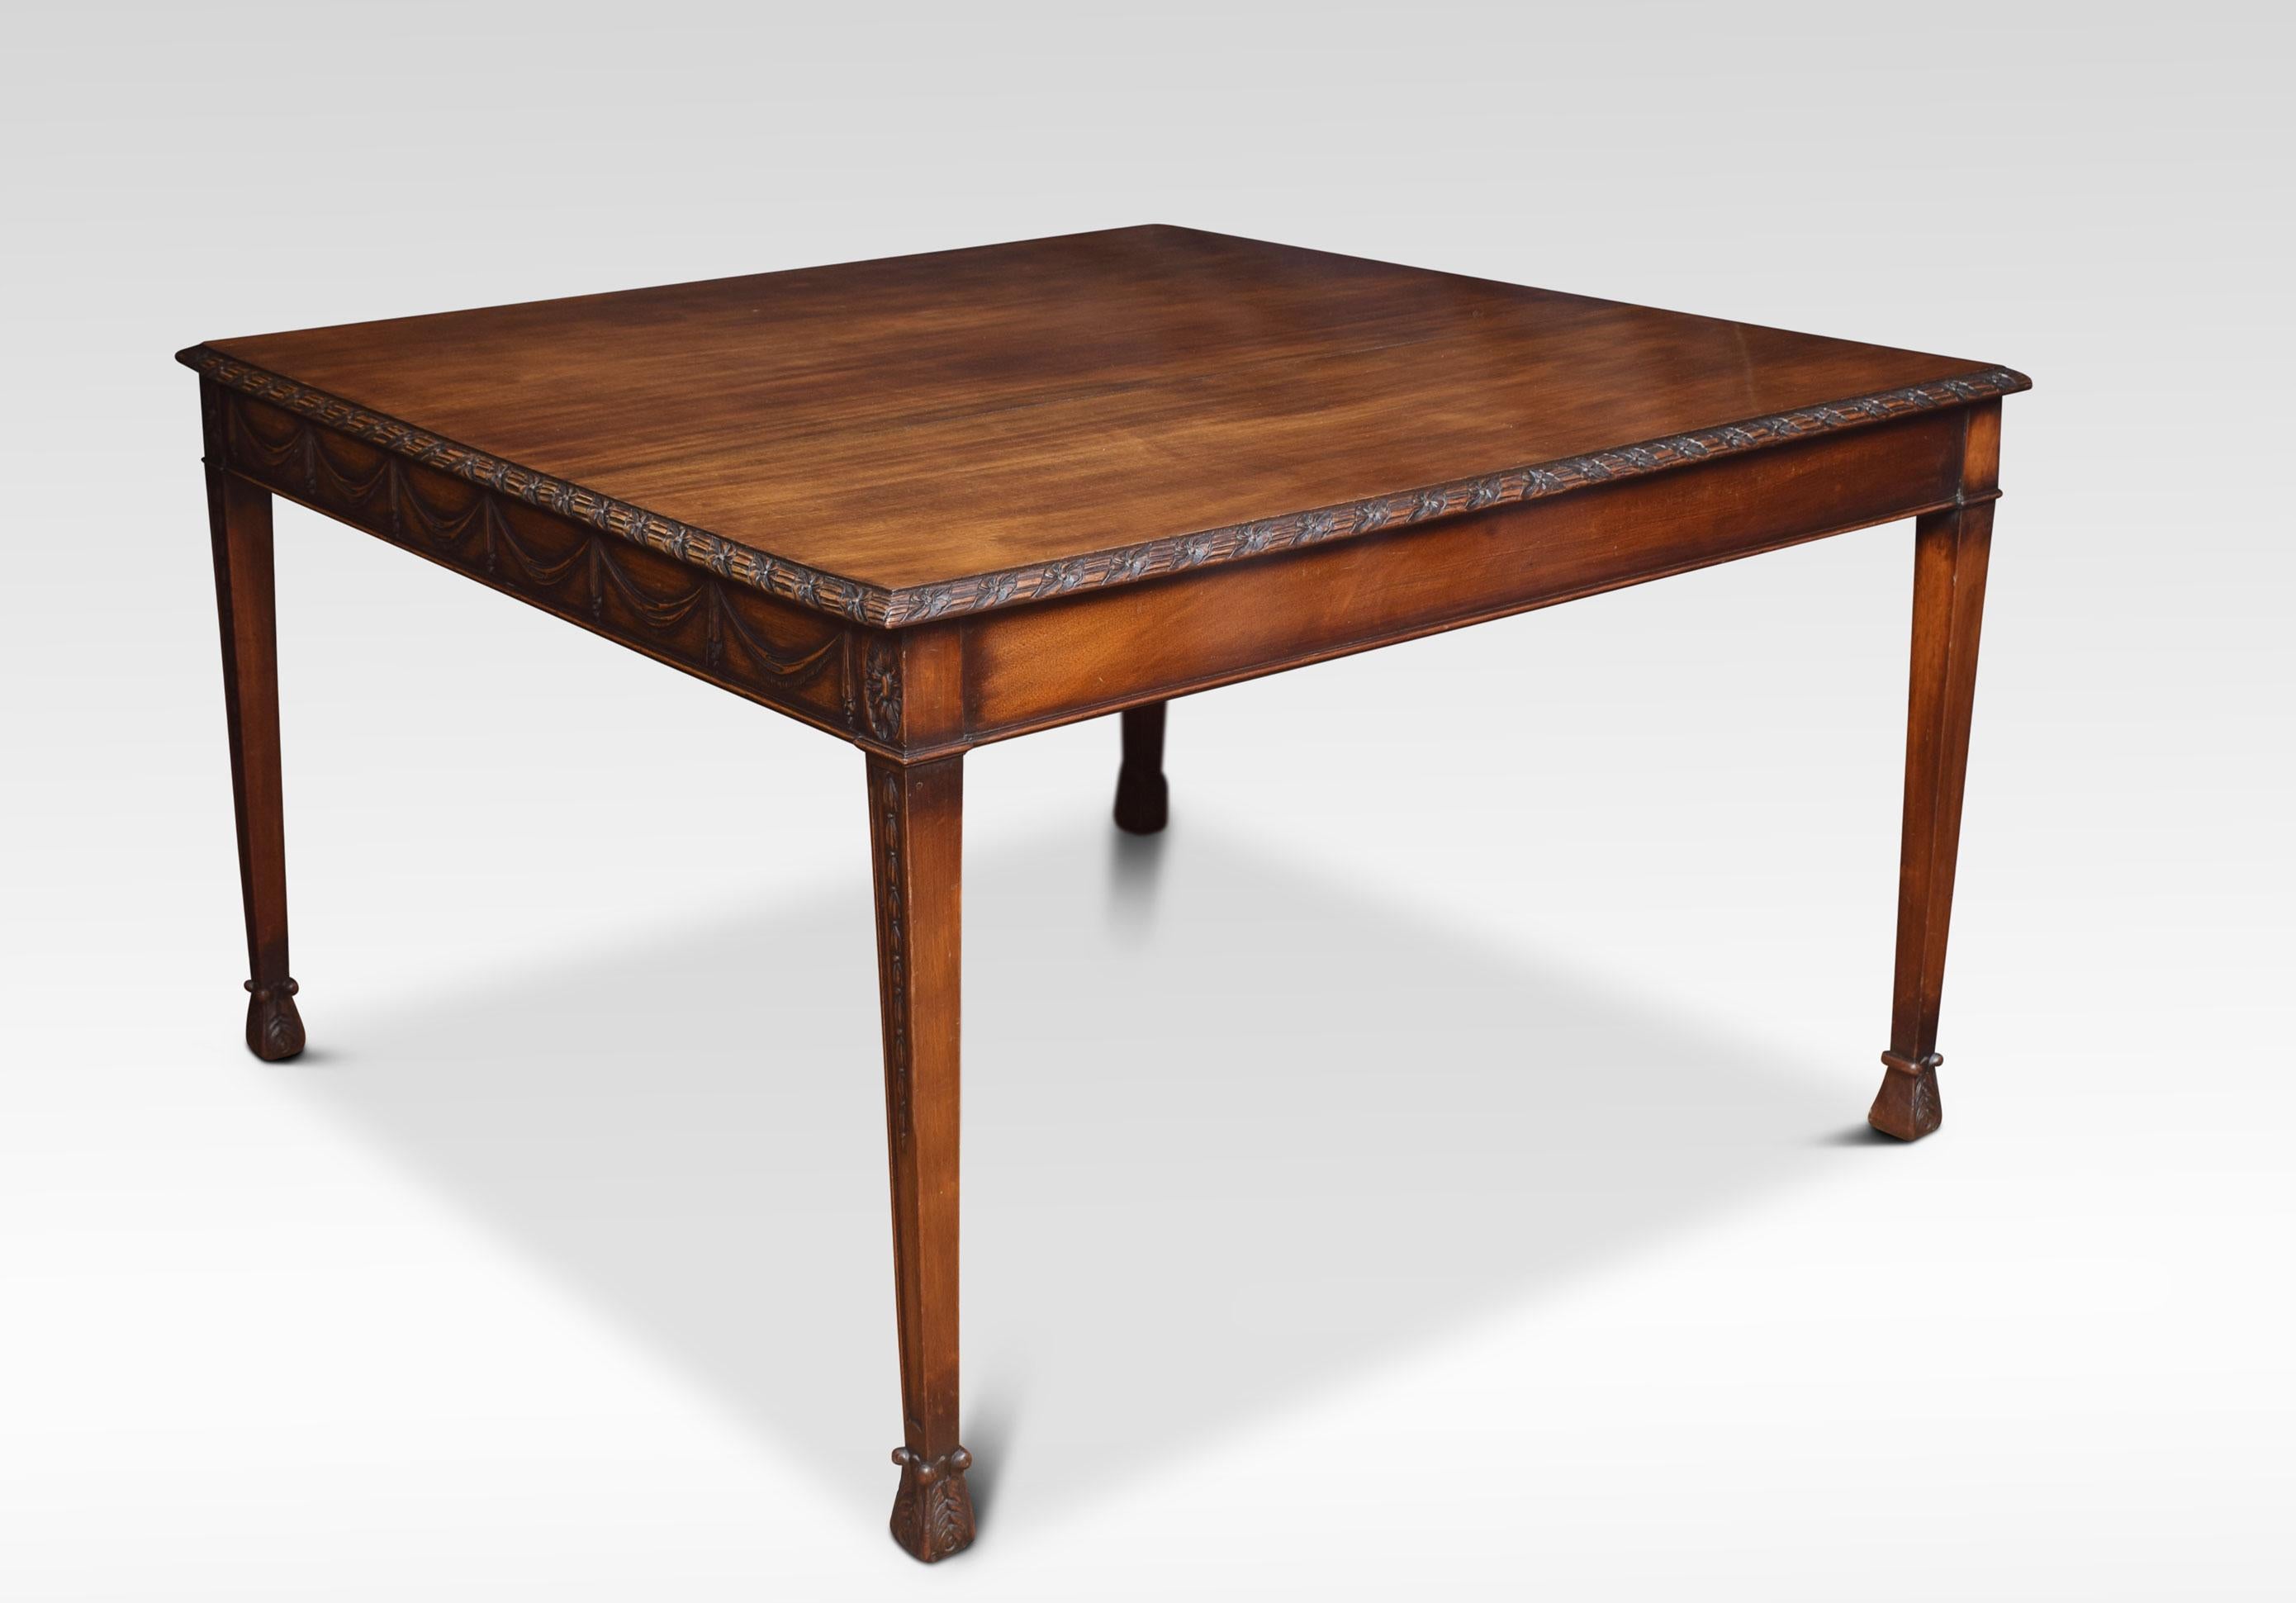 Adam Revival mahogany center table the square top with foliate and reeded carved edge and garlanded frieze raised on tapered square section legs with bellflower trails and acanthus carved feet.
Dimensions:
Height 29 inches
Length 48 inches
Width